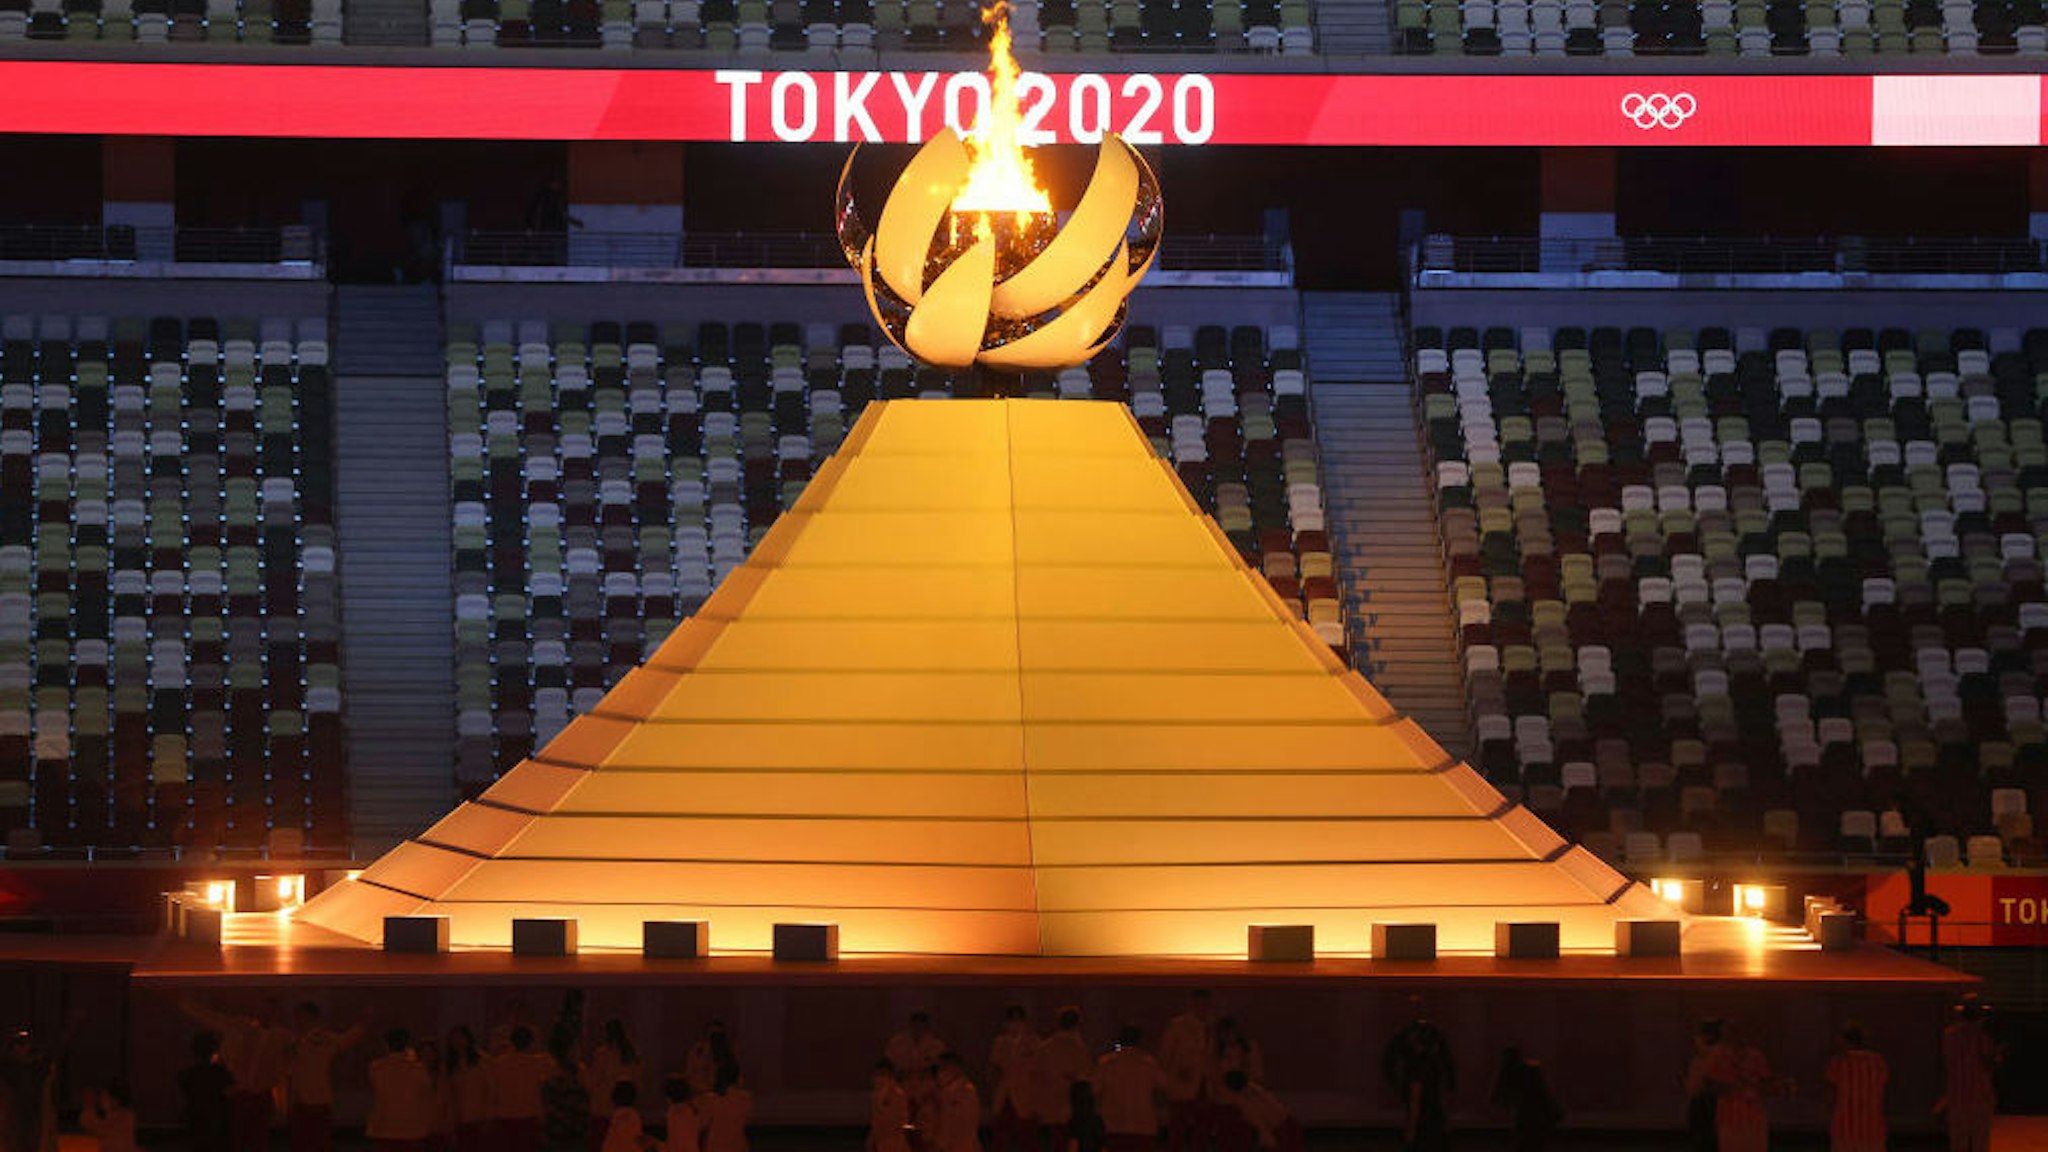 TOKYO, JAPAN - JULY 23: A general view of the Olympic cauldron lit during the Opening Ceremony of the Tokyo 2020 Olympic Games at Olympic Stadium on July 23, 2021 in Tokyo, Japan.